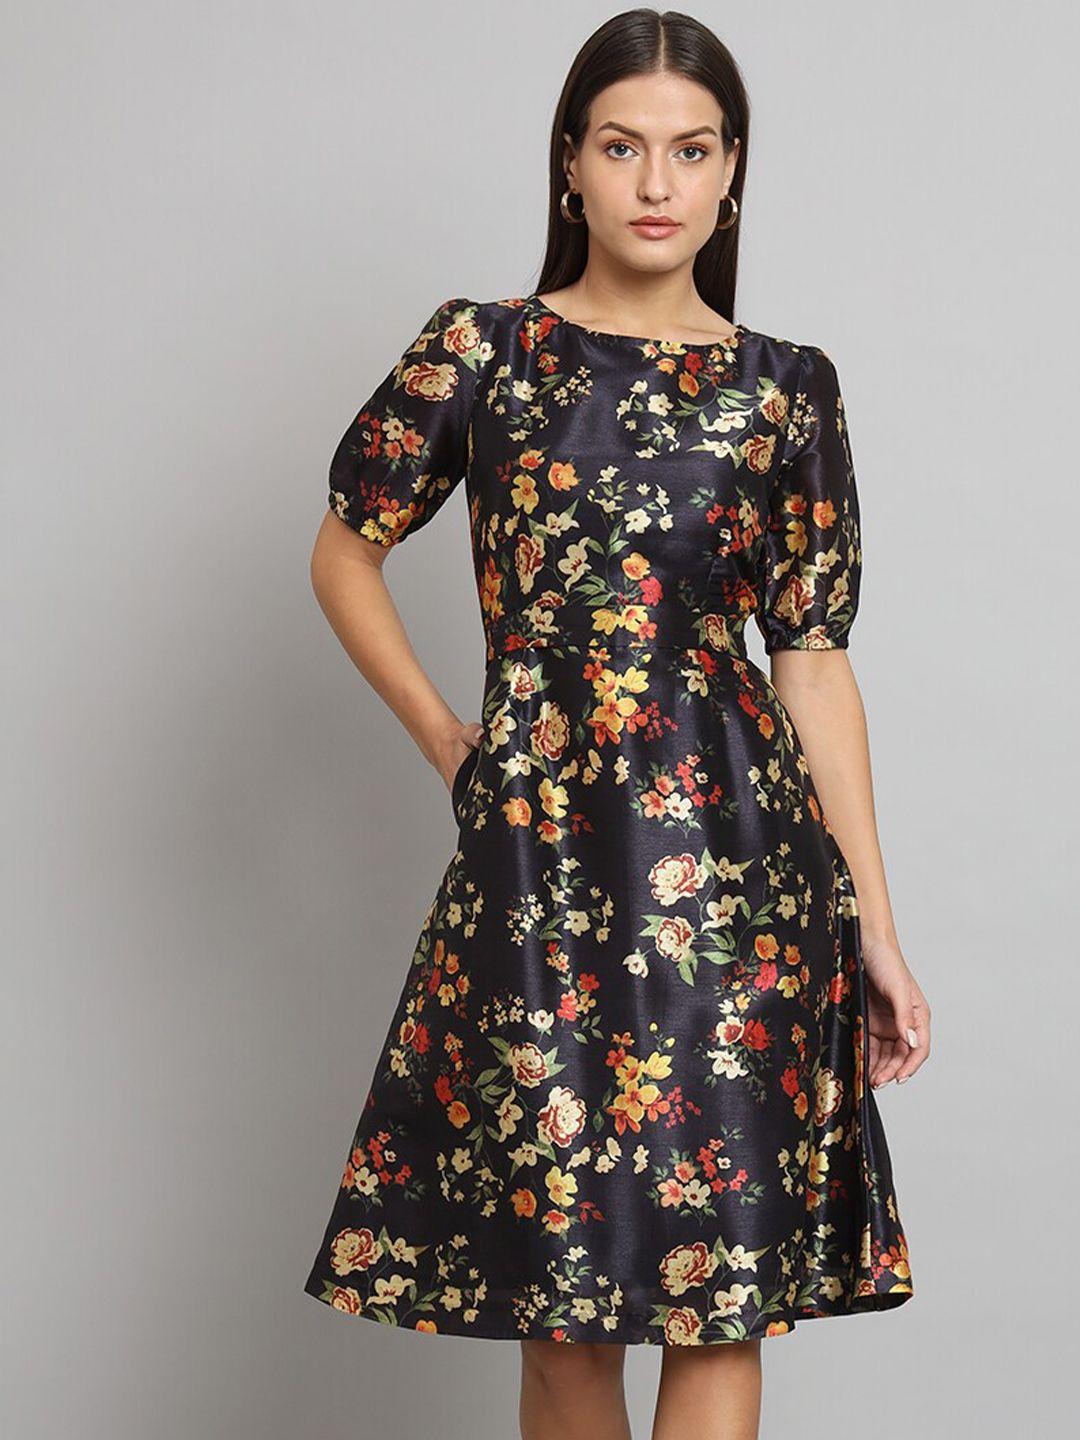 powersutra floral printed puff sleeves silk fit & flare dress